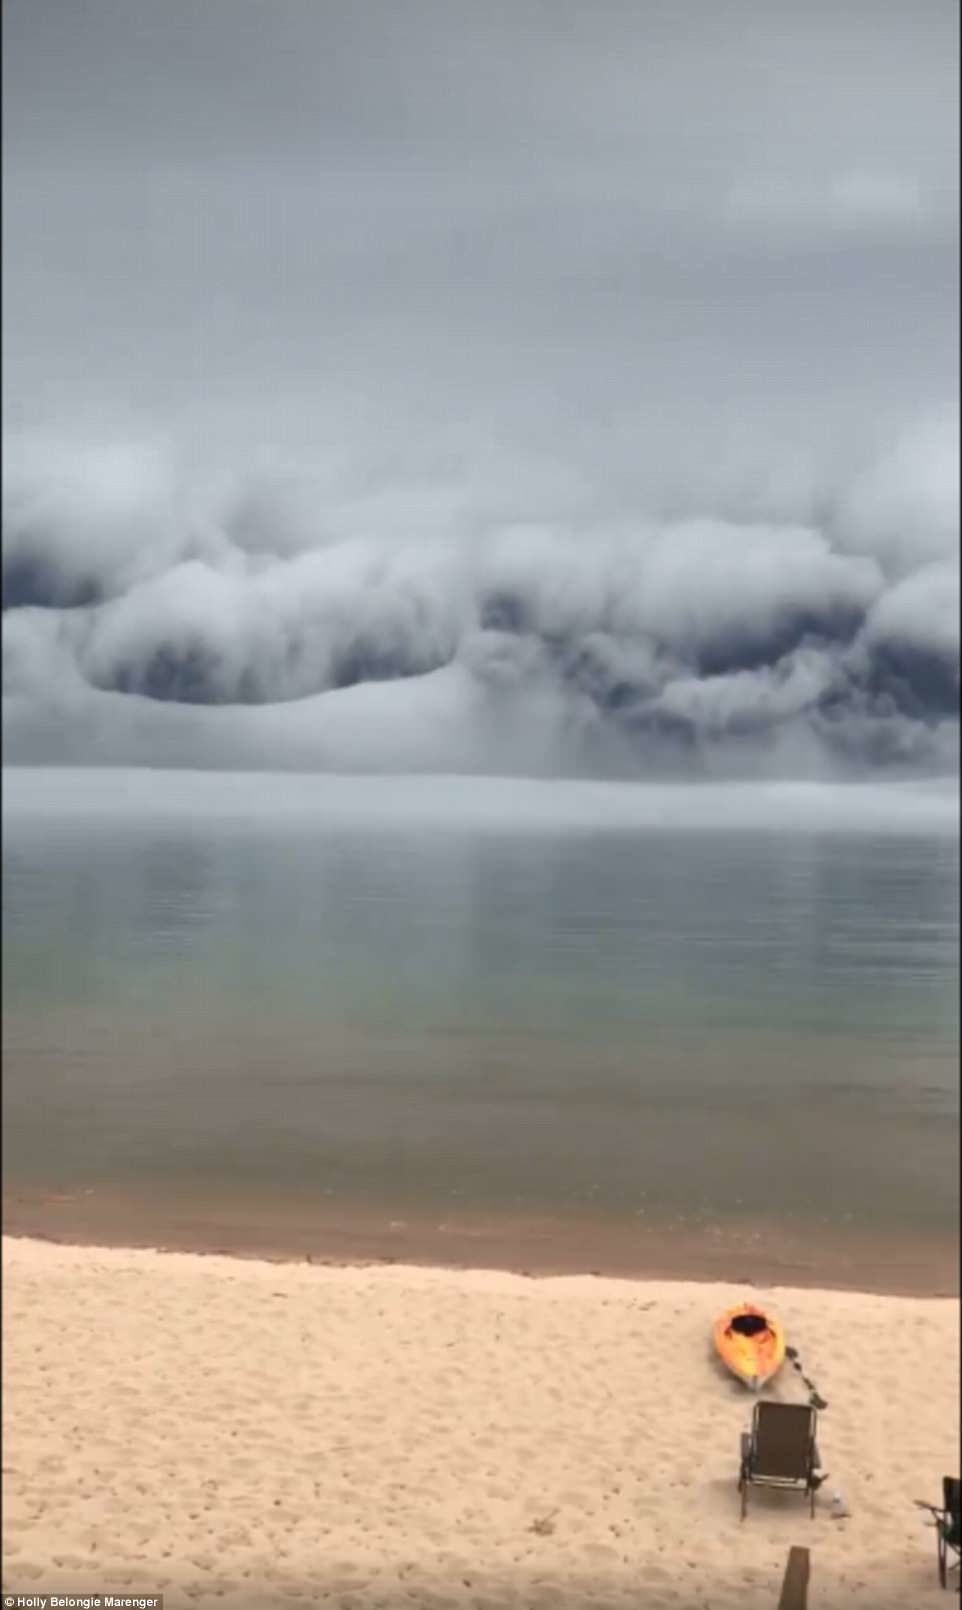 As the cloud rumbled towards her, she reports that the water level rapidly retreated, disappearing back by about 30 feet. The enormous cloud spanned from horizon to horizon